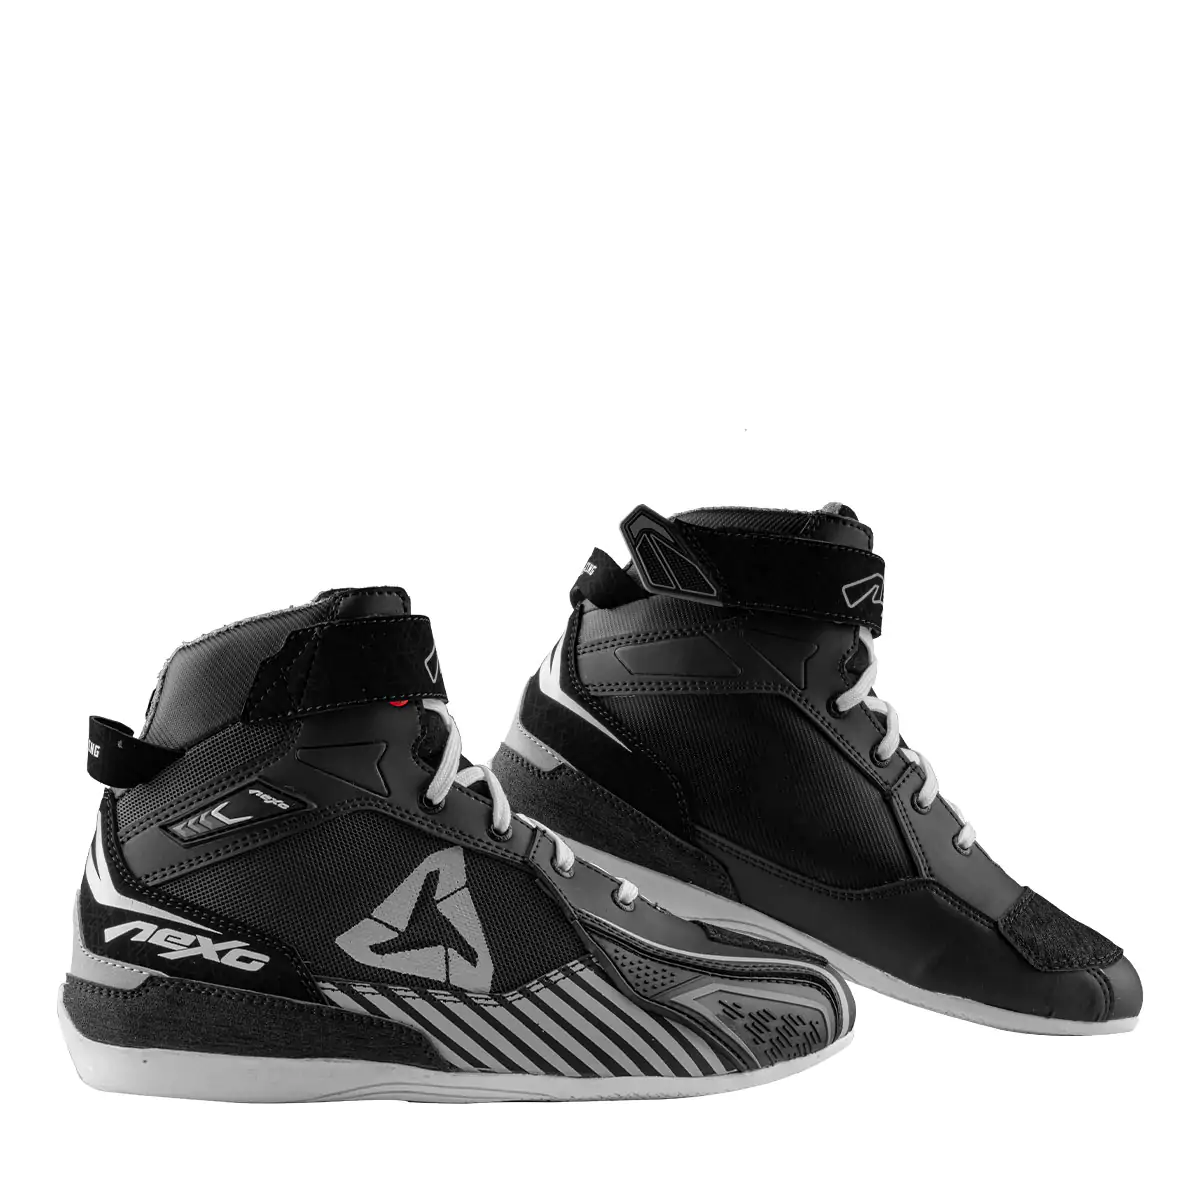 black motorcycle sneakers shoe pair with little bit white touch written nexo on them